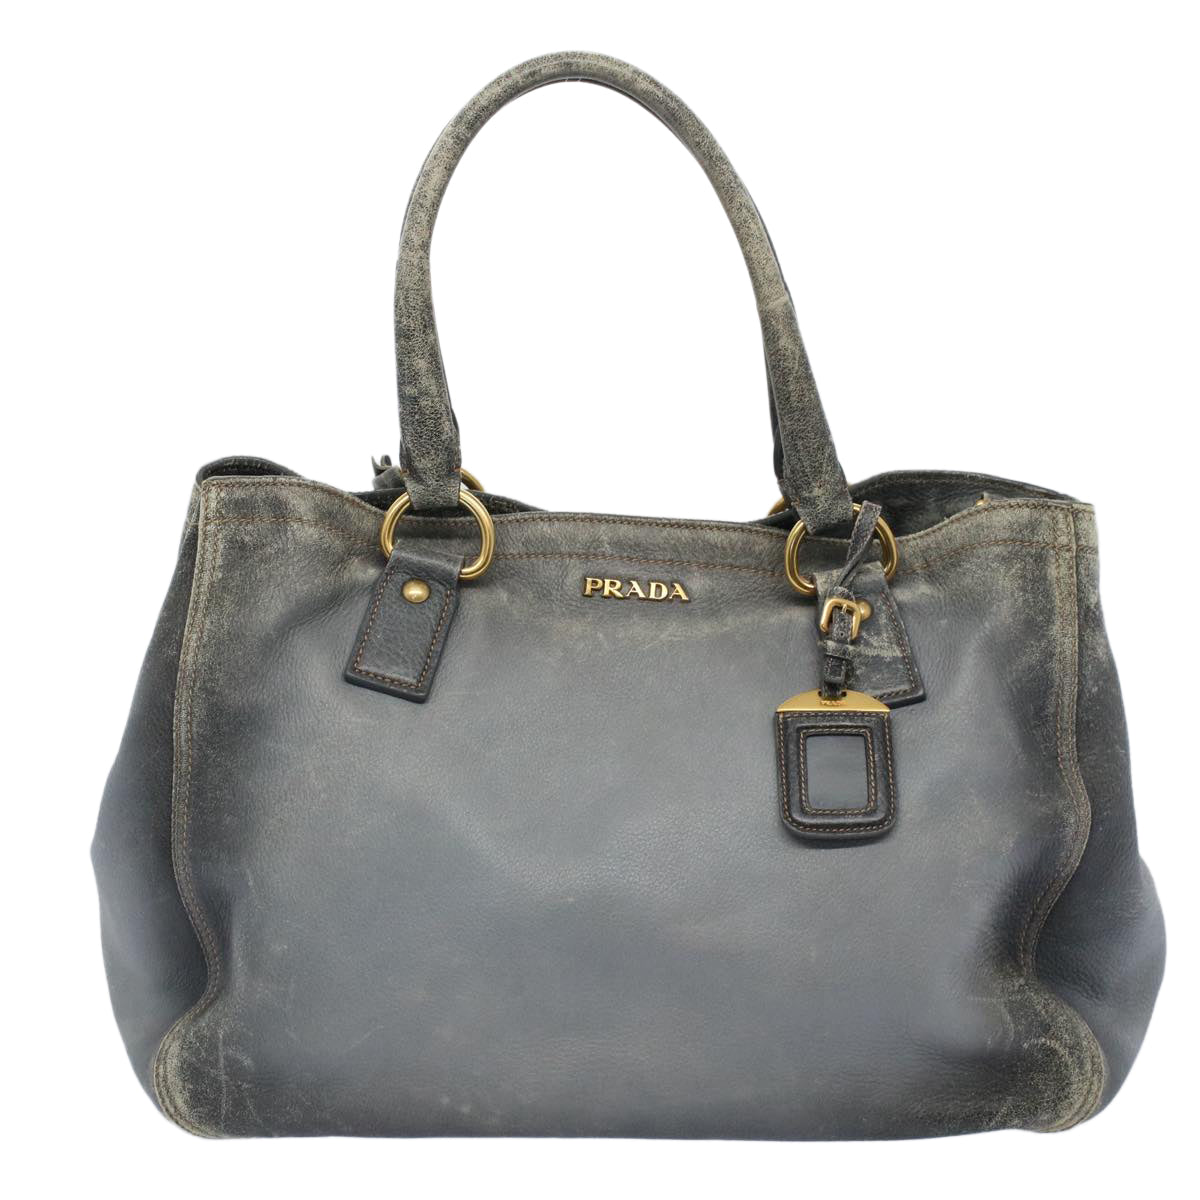 PRADA Tote Bag Leather 2way Gray Auth bs10117